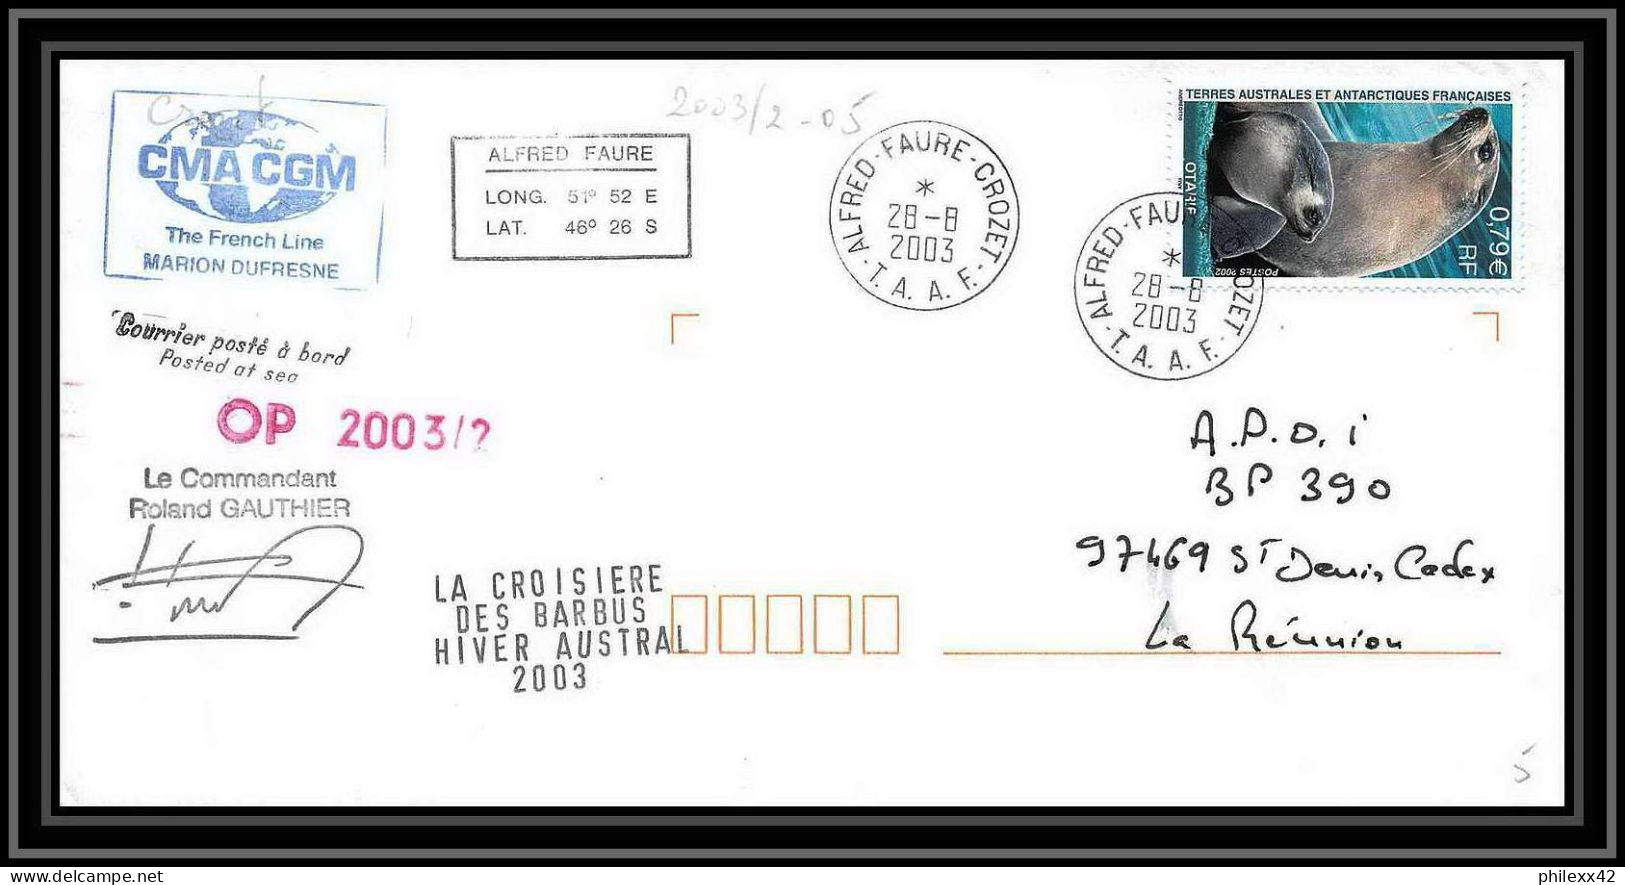 2401 Dufresne 2 Signé Signed Op 2003/2 Crozet 28/8/2003 N°247 ANTARCTIC Terres Australes (taaf) Lettre Cover Otarie Seal - Spedizioni Antartiche